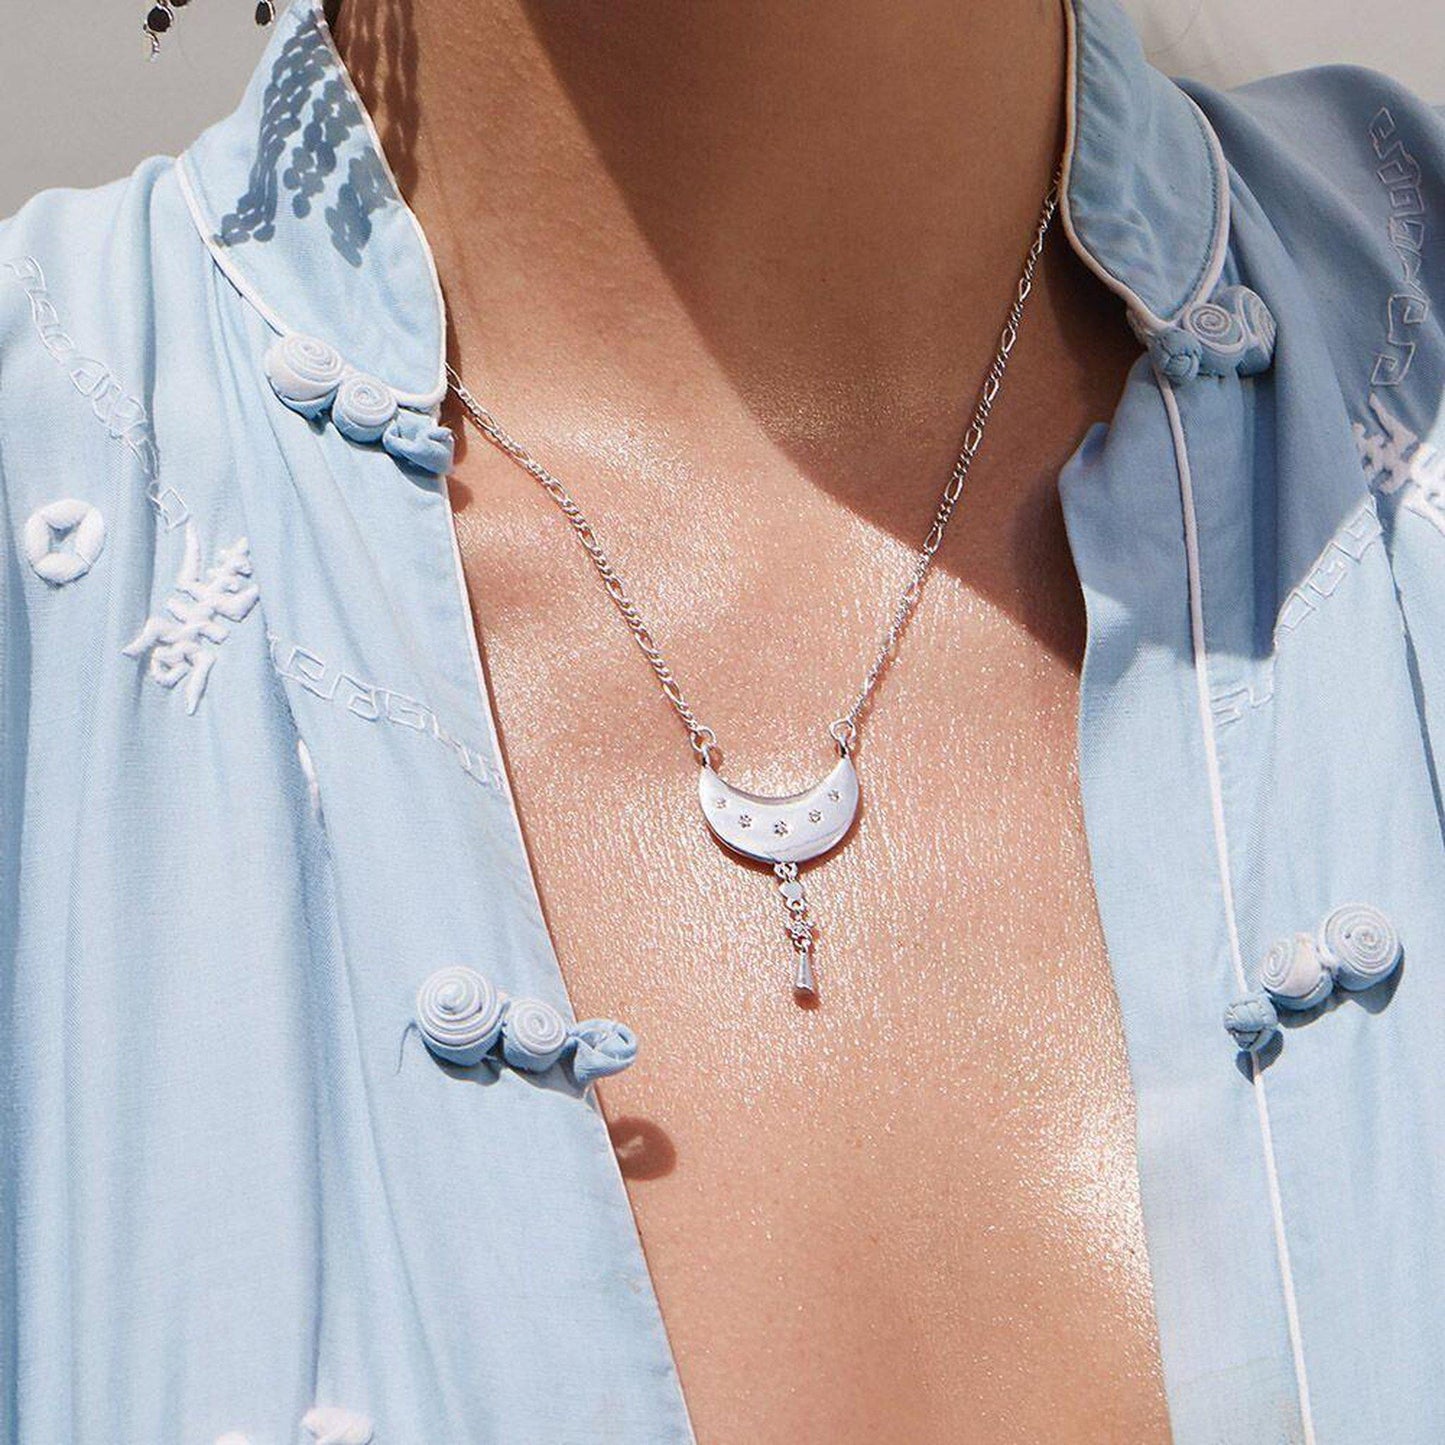 Luv AJ Celestial Moon Charm Necklace in Silver on model